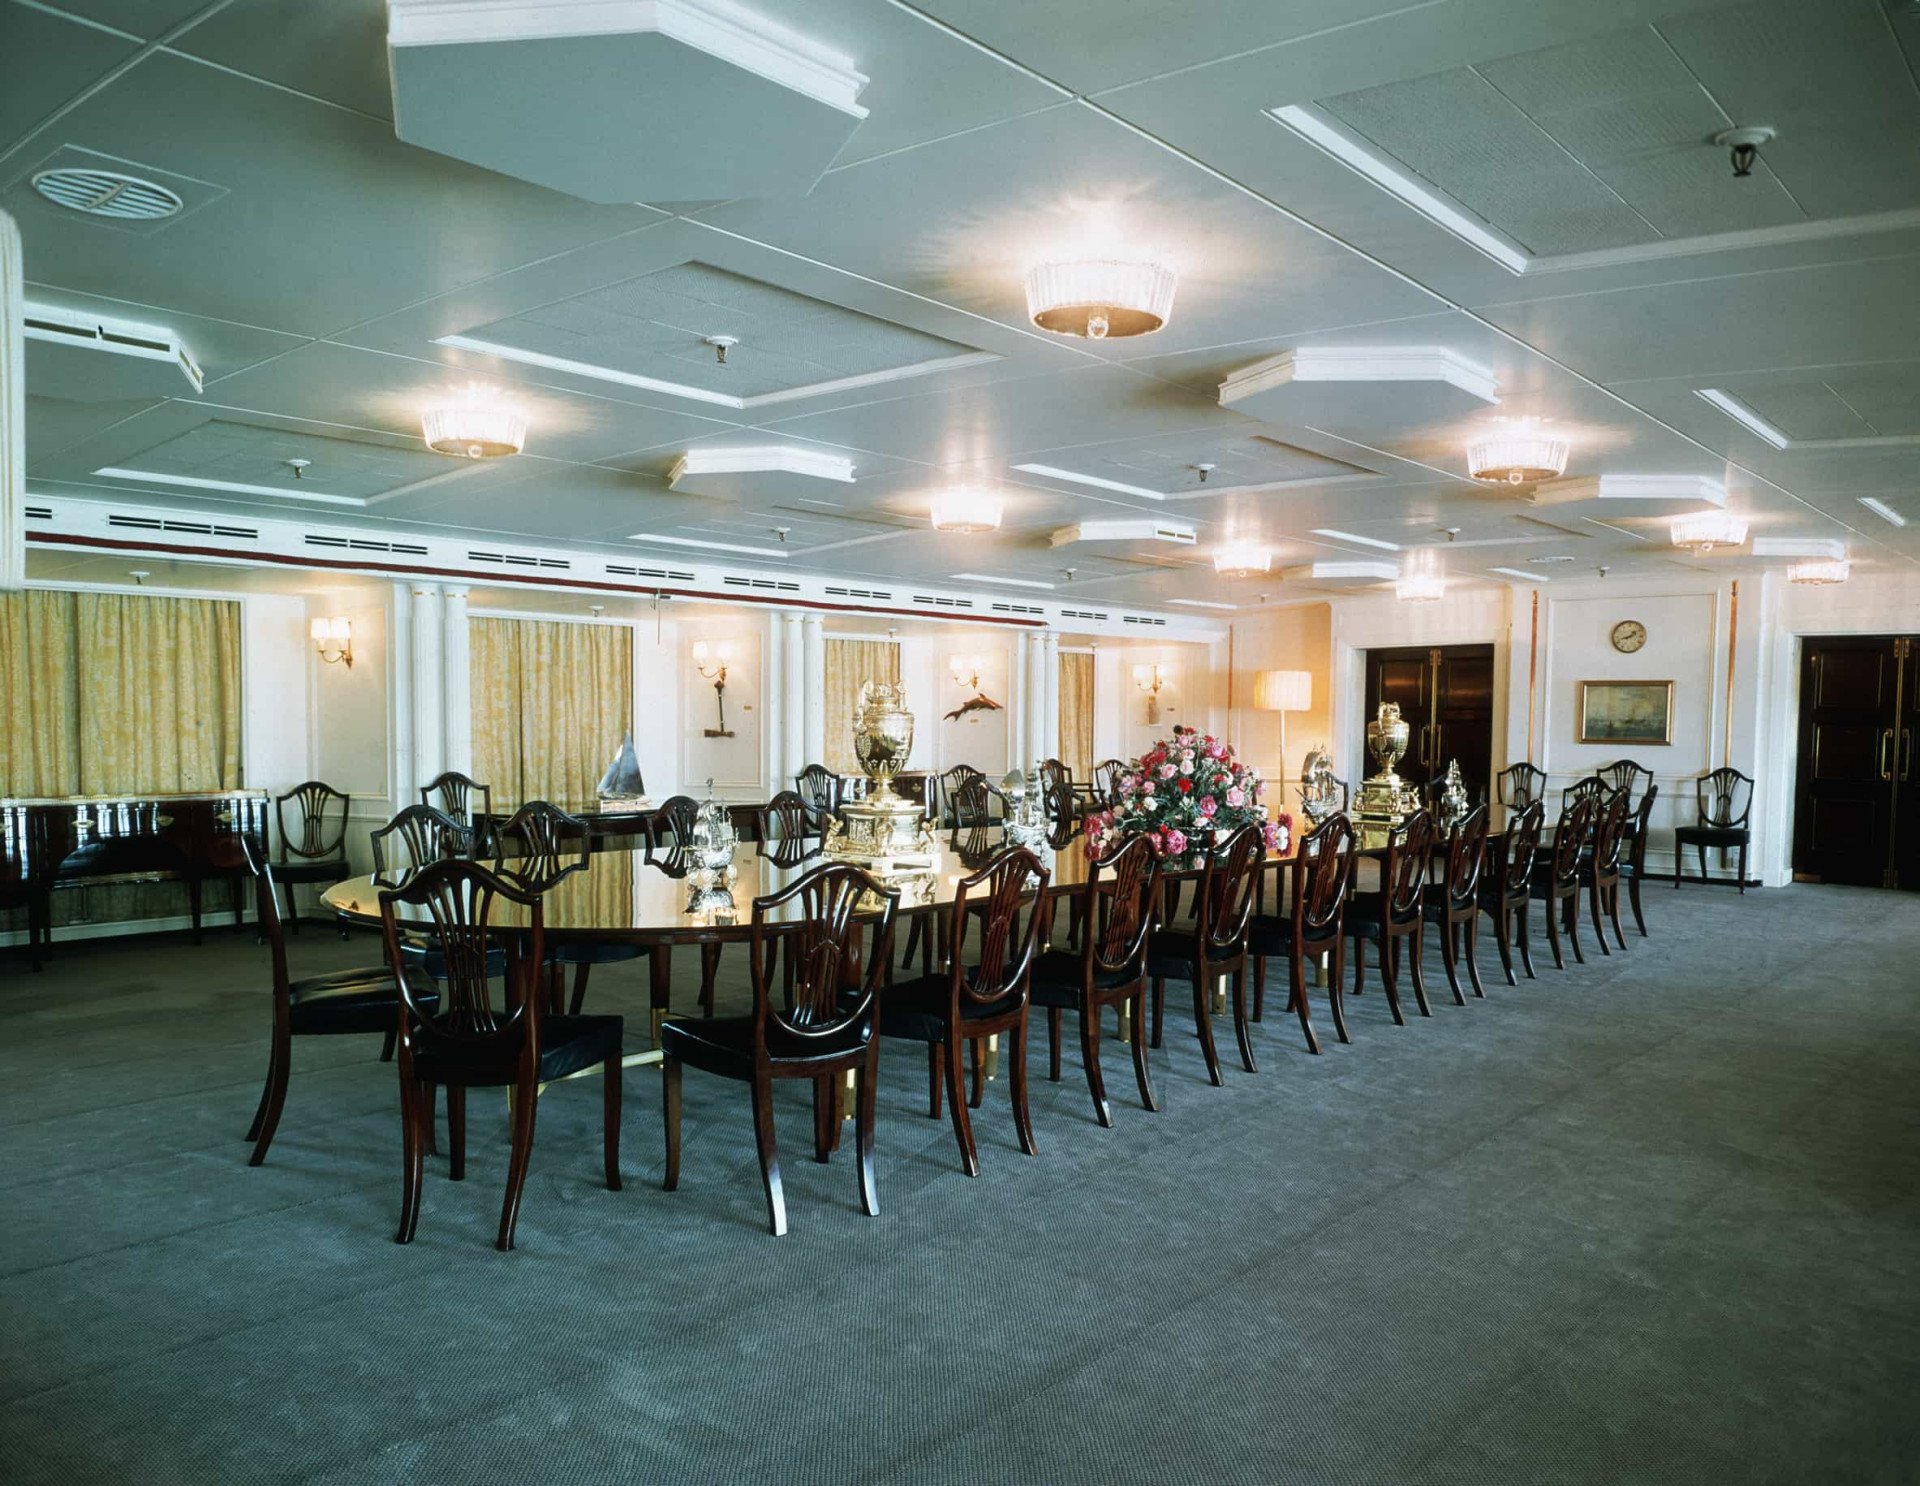 <p>The Reagan's dined in <em>Britannia</em>'s grand dining room (pictured), which could host up to 56 guests. The dining room was set within the ship's royal apartments and included a lounge, drawing room, and guest bedrooms.</p><p>You may also like:<a href="https://www.starsinsider.com/n/394229?utm_source=msn.com&utm_medium=display&utm_campaign=referral_description&utm_content=474709v3en-sg"> All the ways Leonardo DiCaprio spends his millions</a></p>